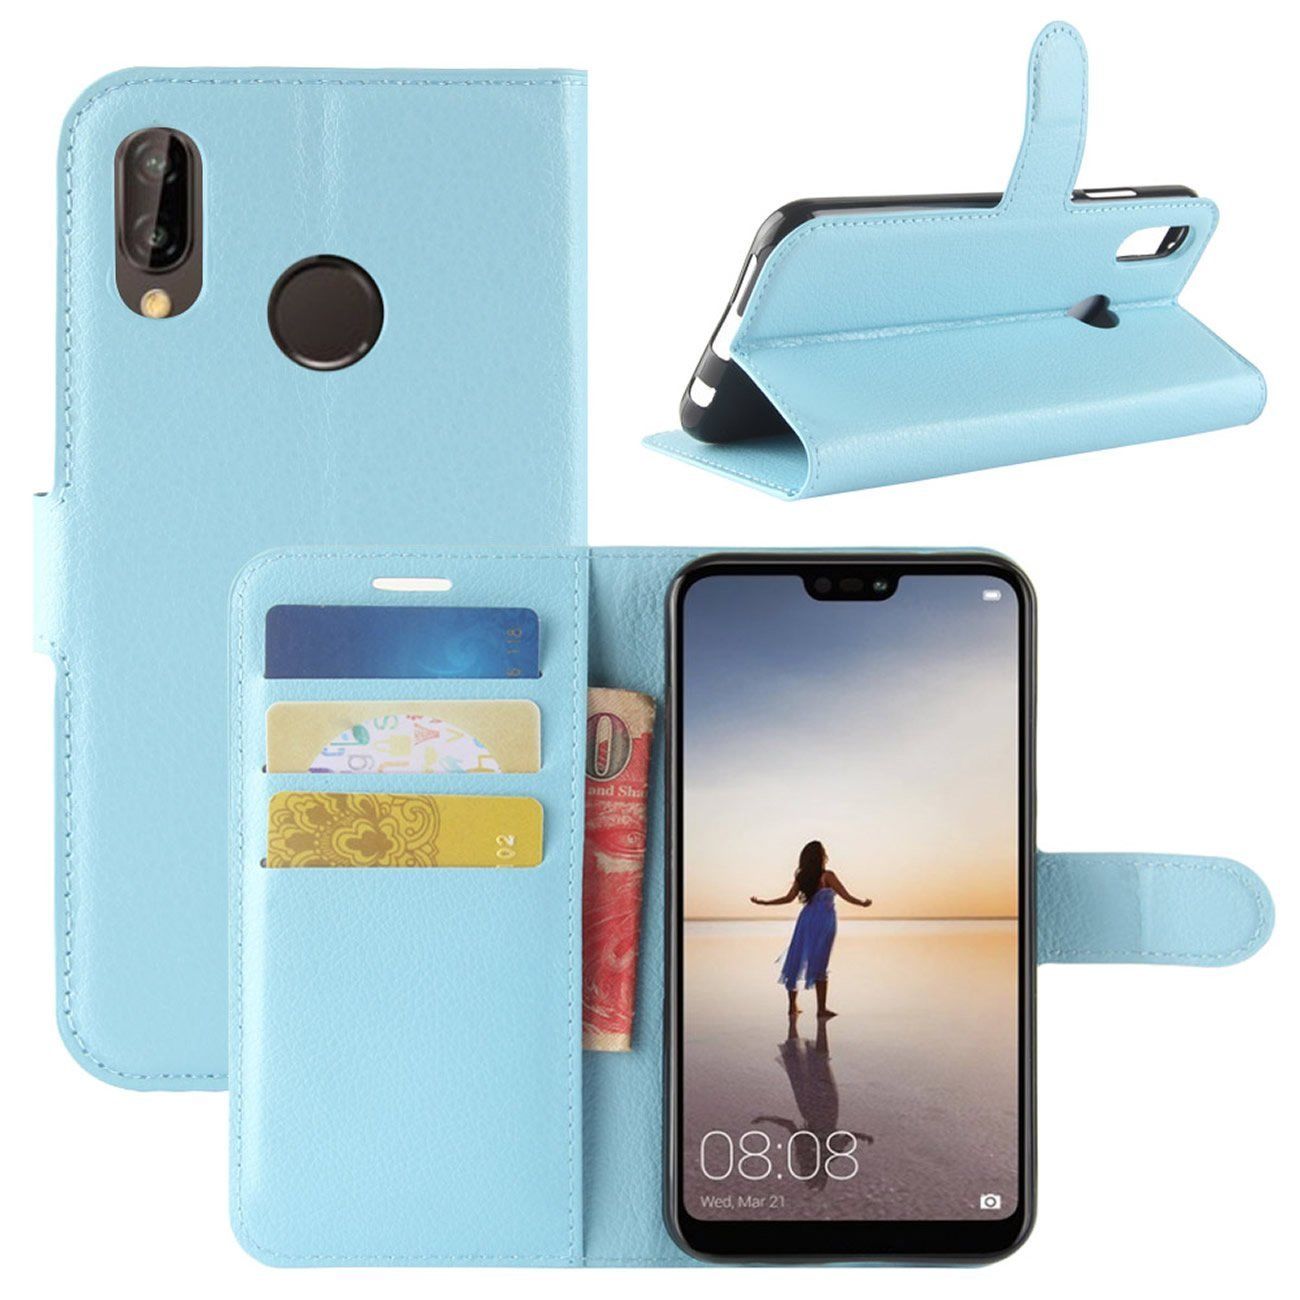 New Premium Leather Wallet Case TPU Cover For HUAWEI Nova 3i-Skyblue